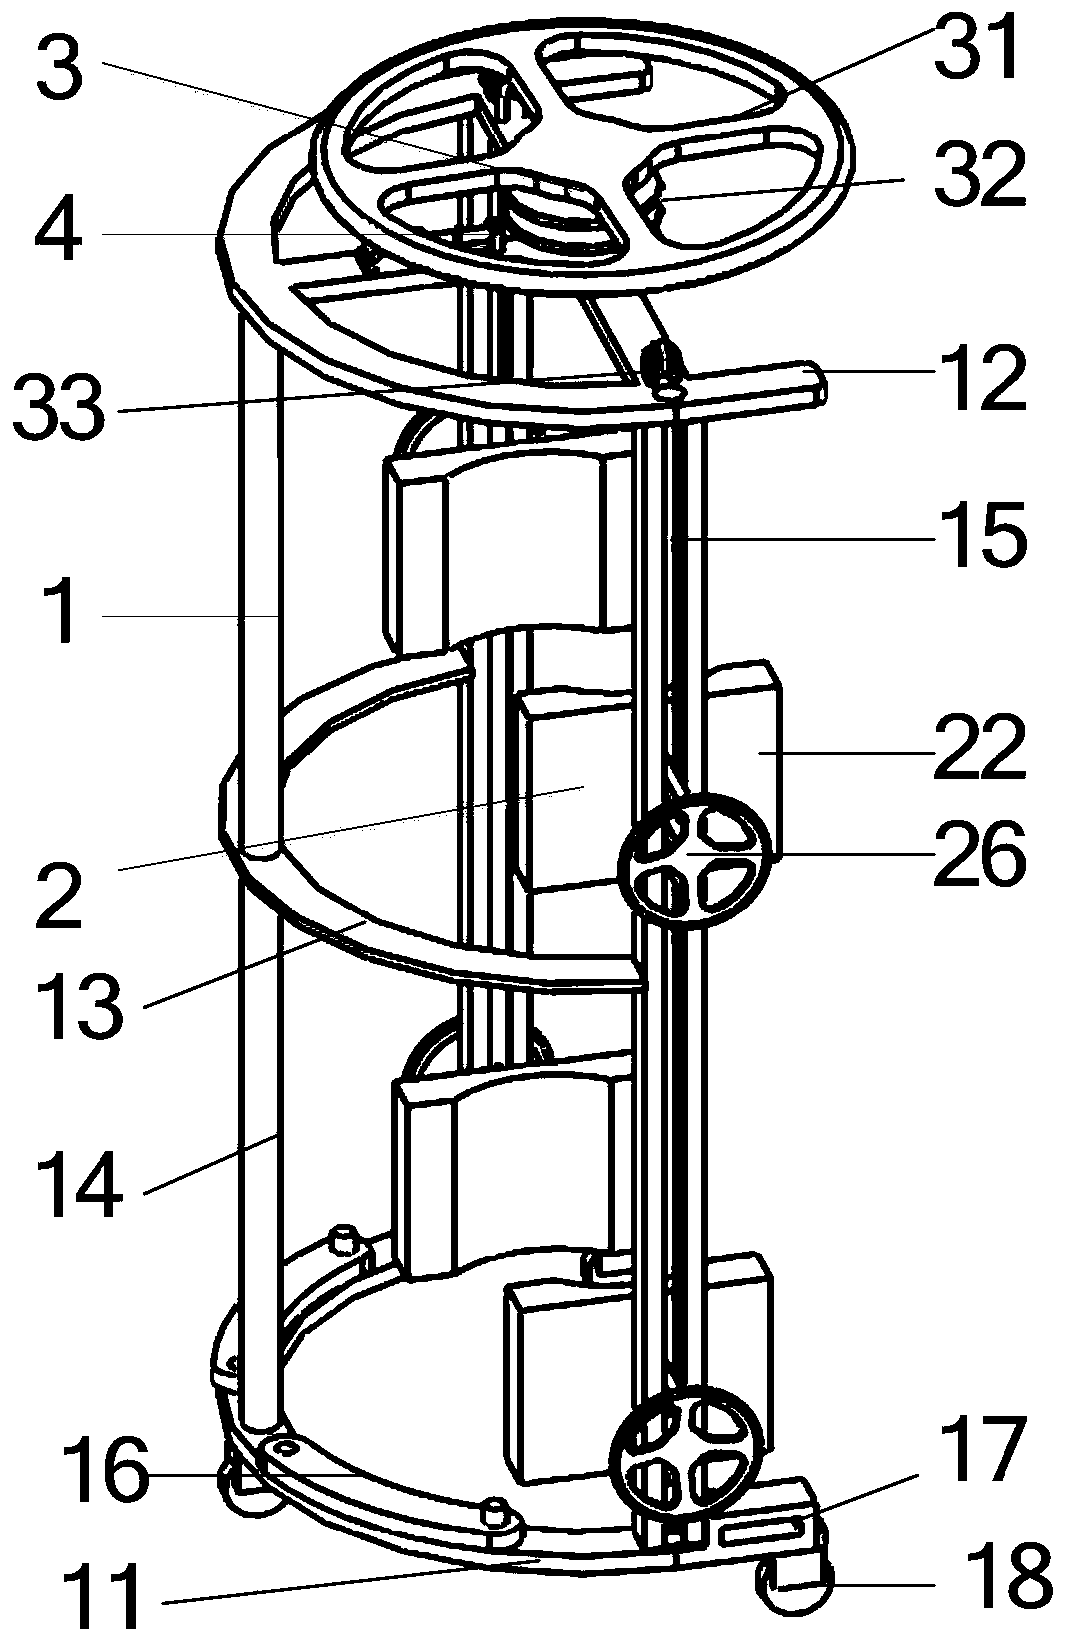 An oil drum handling device